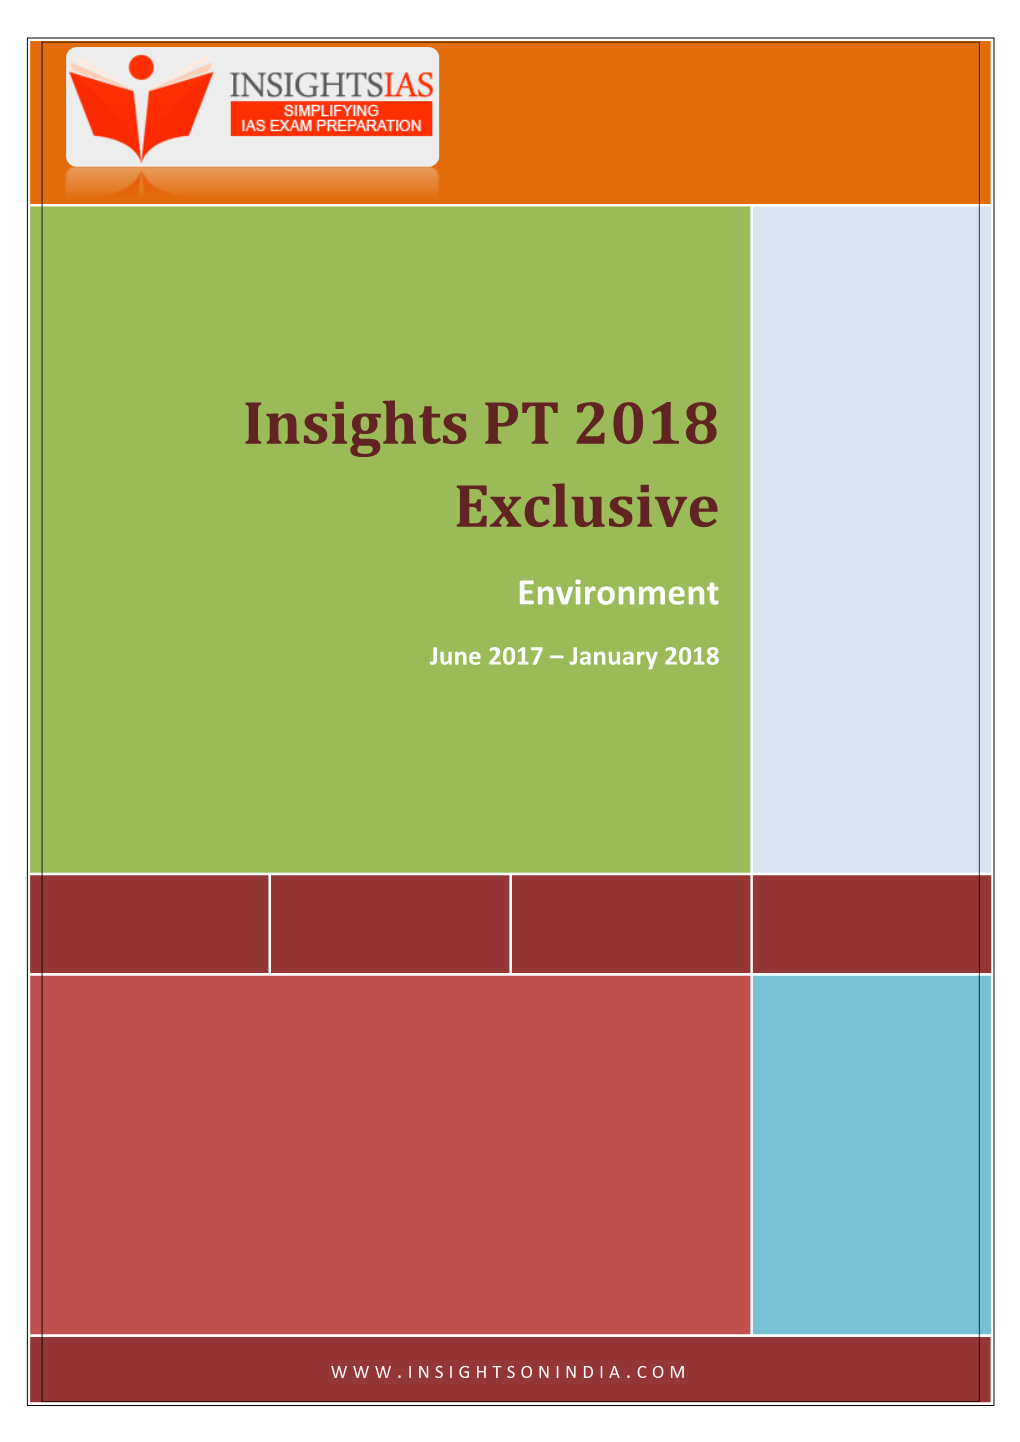 Insights PT 2018 Exclusive (Environment)